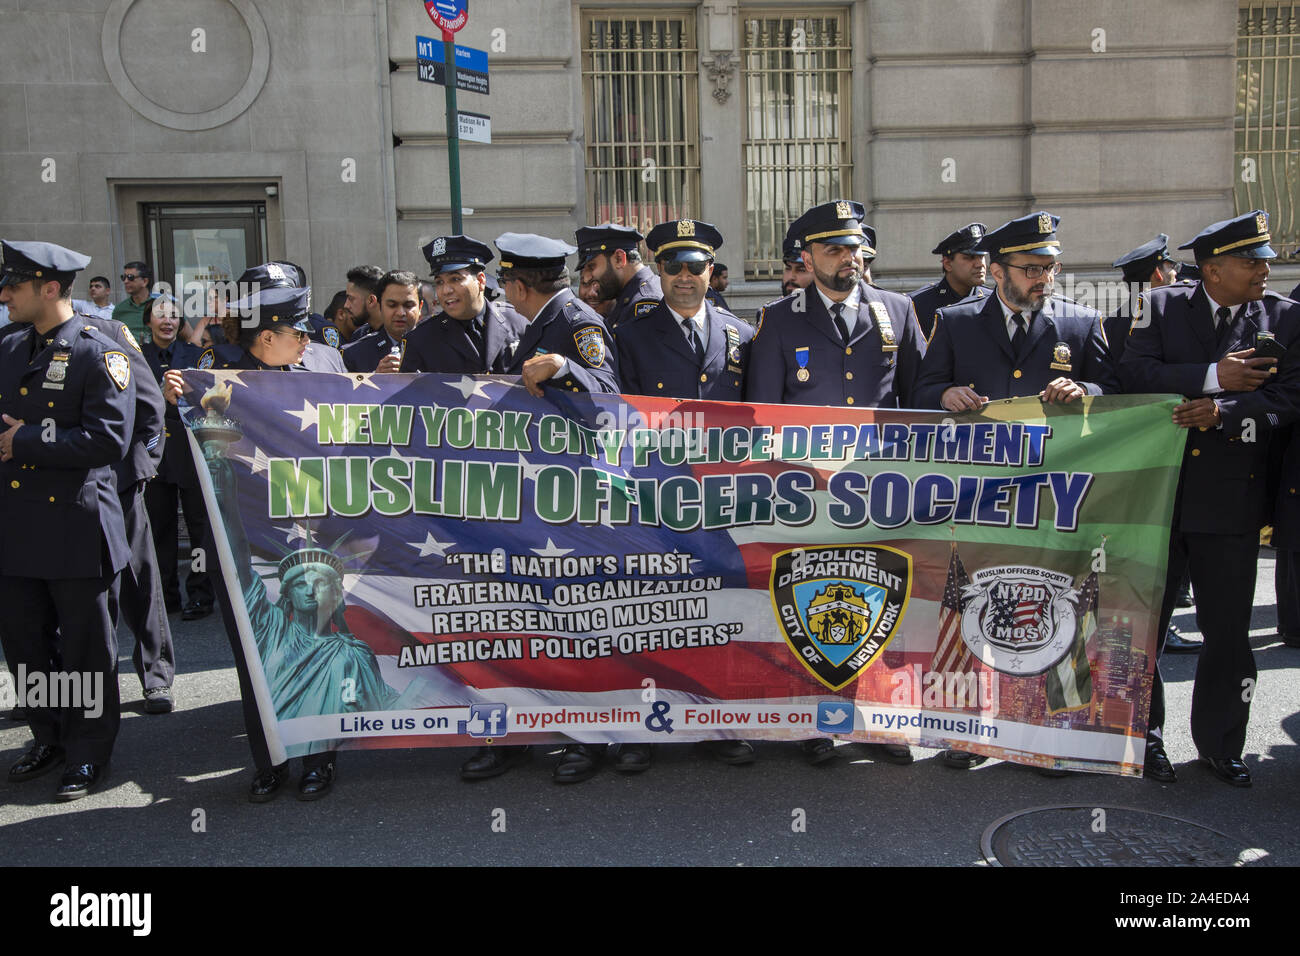 American Muslim Day Parade on Madison Avenue in New York City. Members of the Muslim Officers Society of the NYPD ready to carry their banner in the parade. Stock Photo